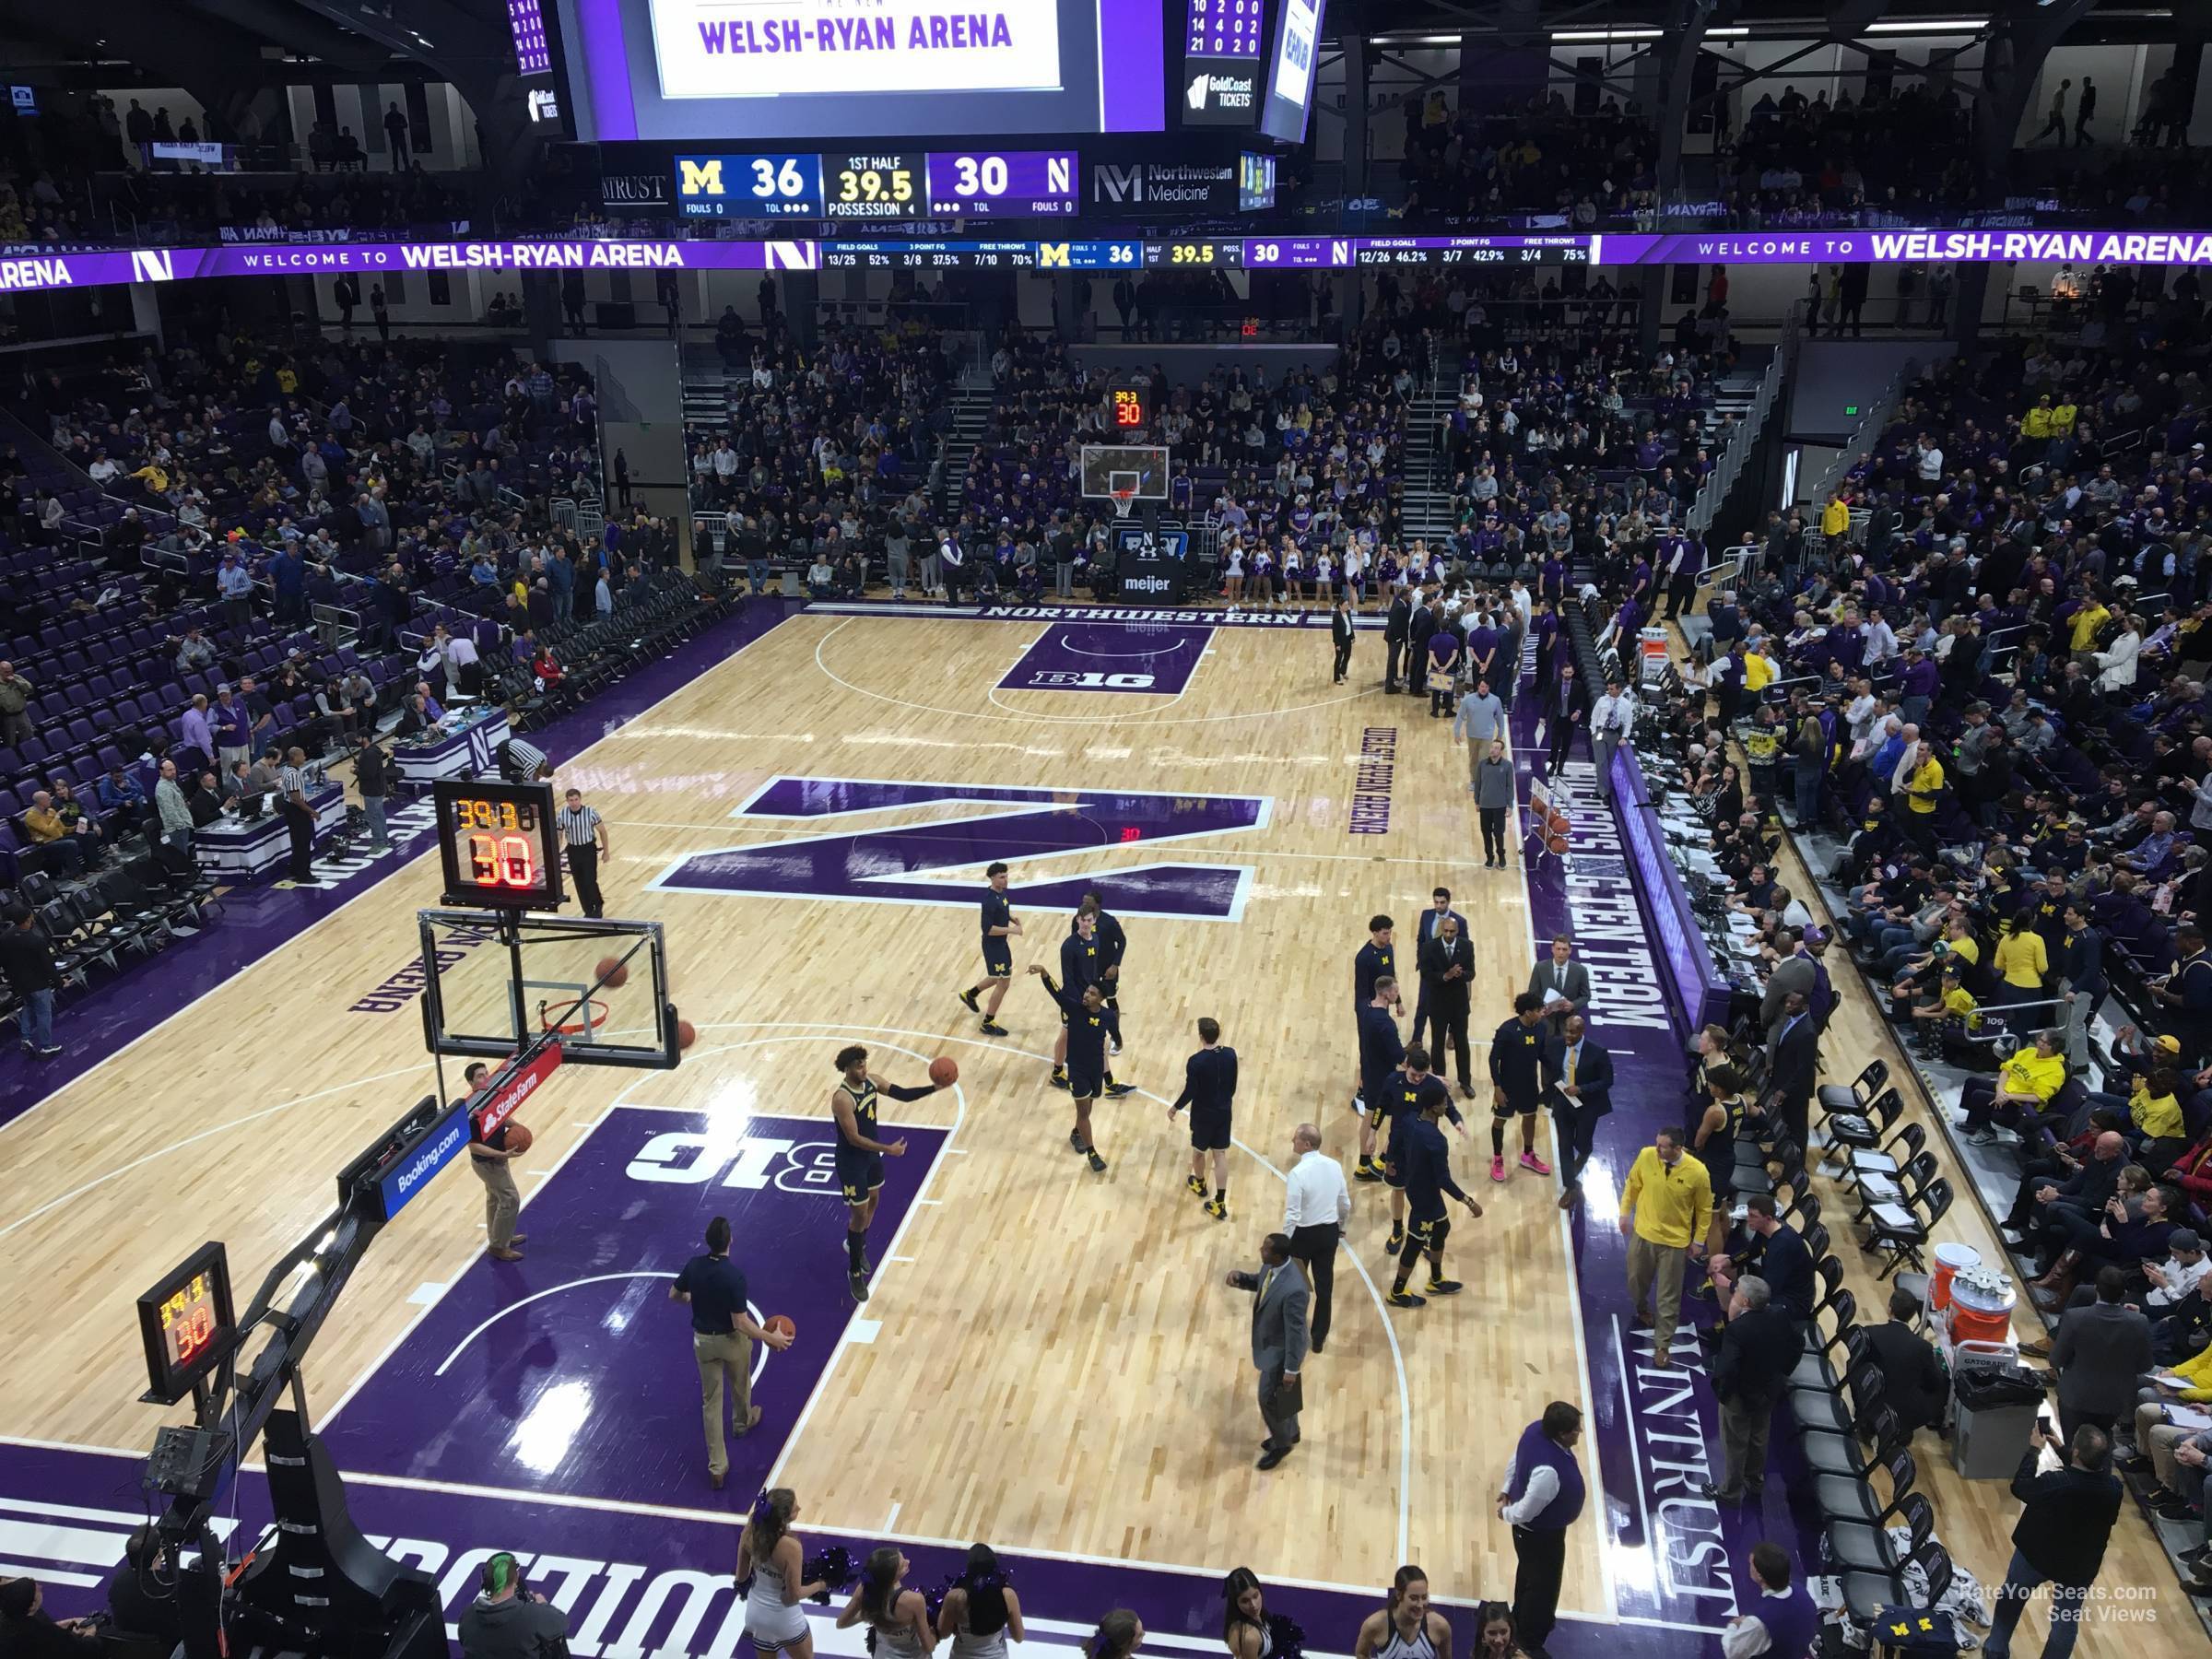 section 213, row 1 seat view  - welsh-ryan arena